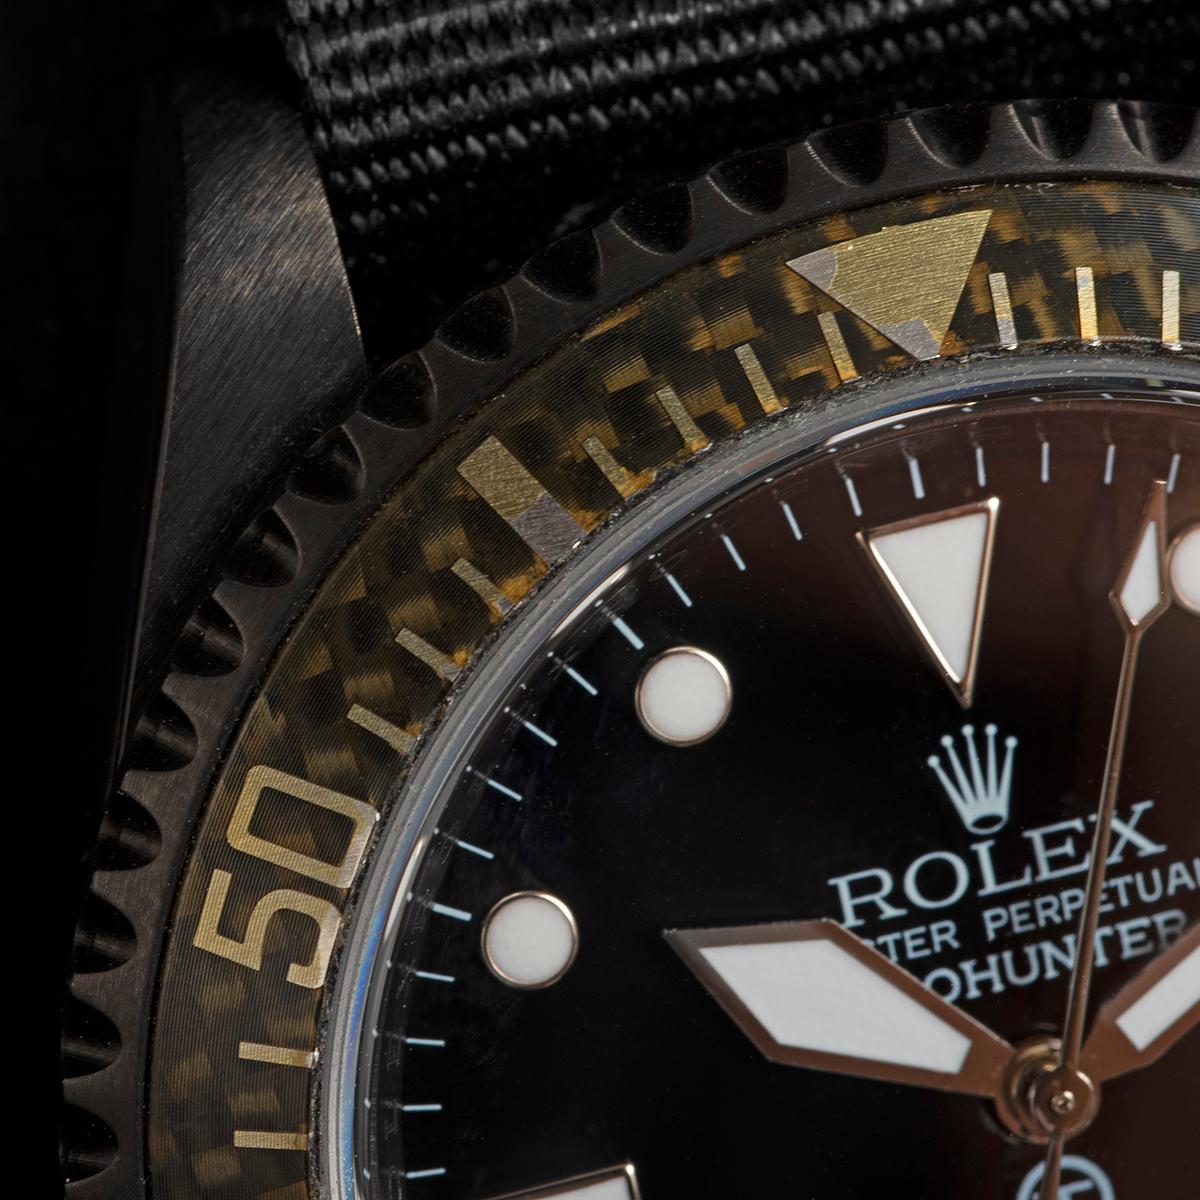 Our Rolex Submariner 'no date' reference 14060M is a limited edition of 100 pieces customised by Pro Hunter as a 